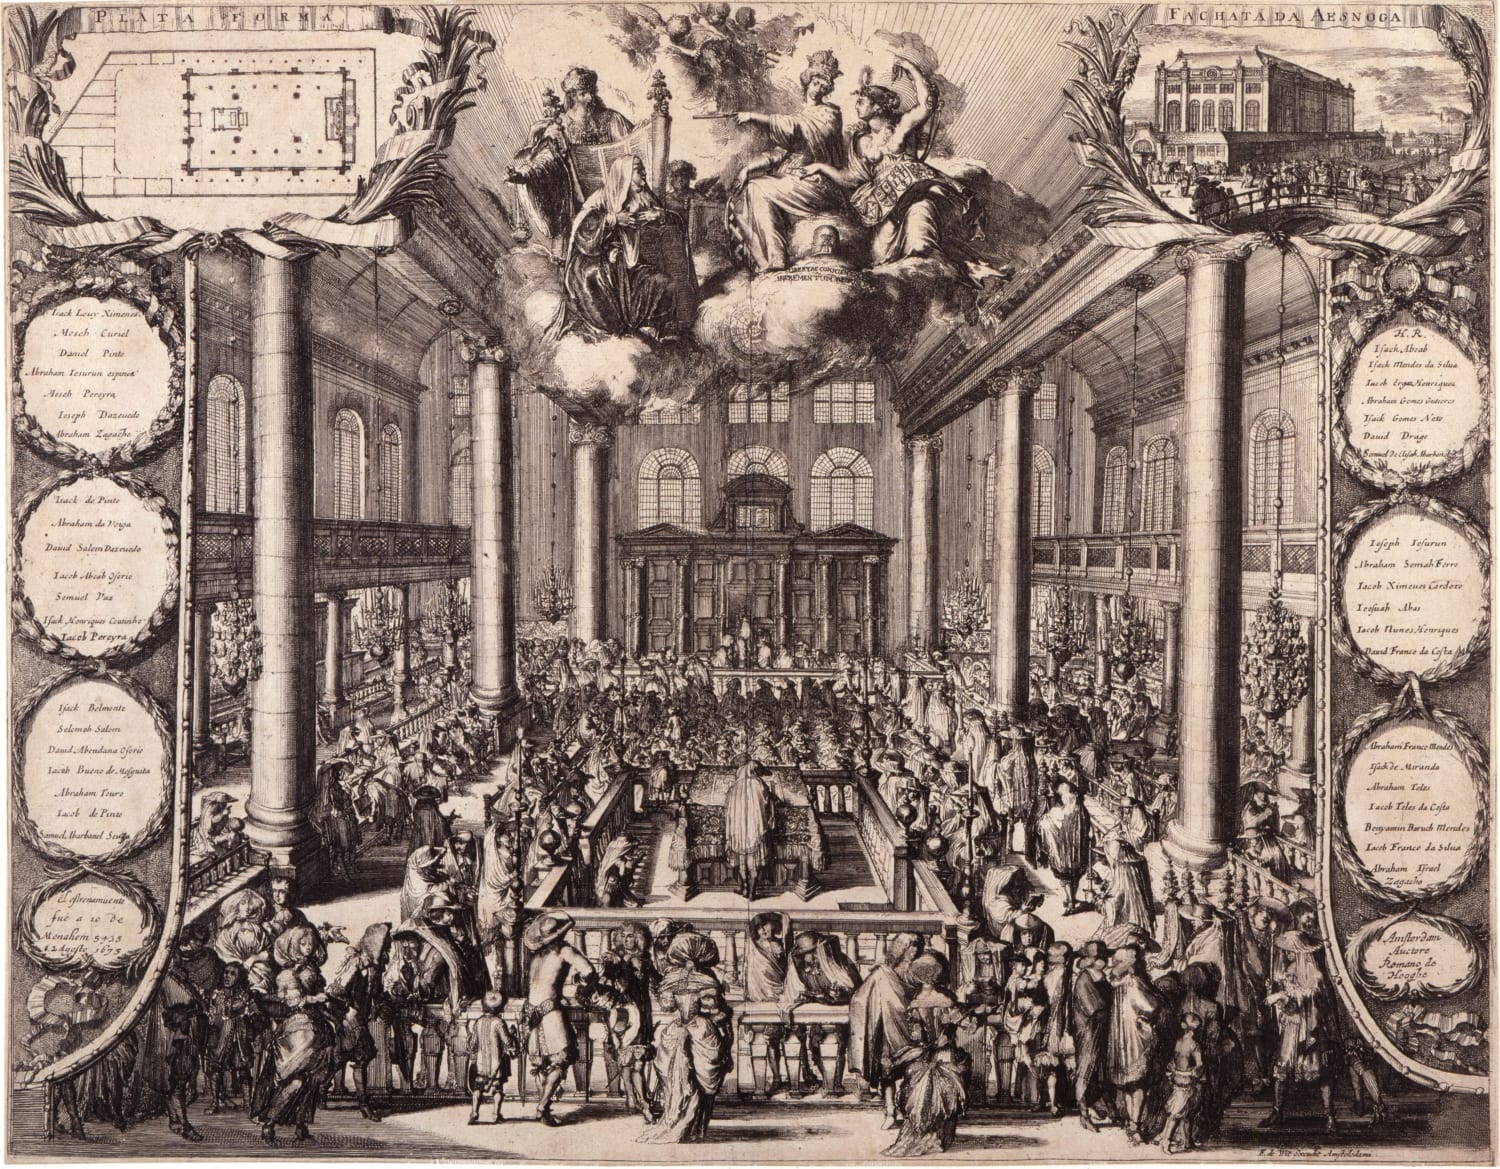 "The Portuguese synagogue in Amsterdam at its inauguration" (1675) by Romeyn de Hooghe